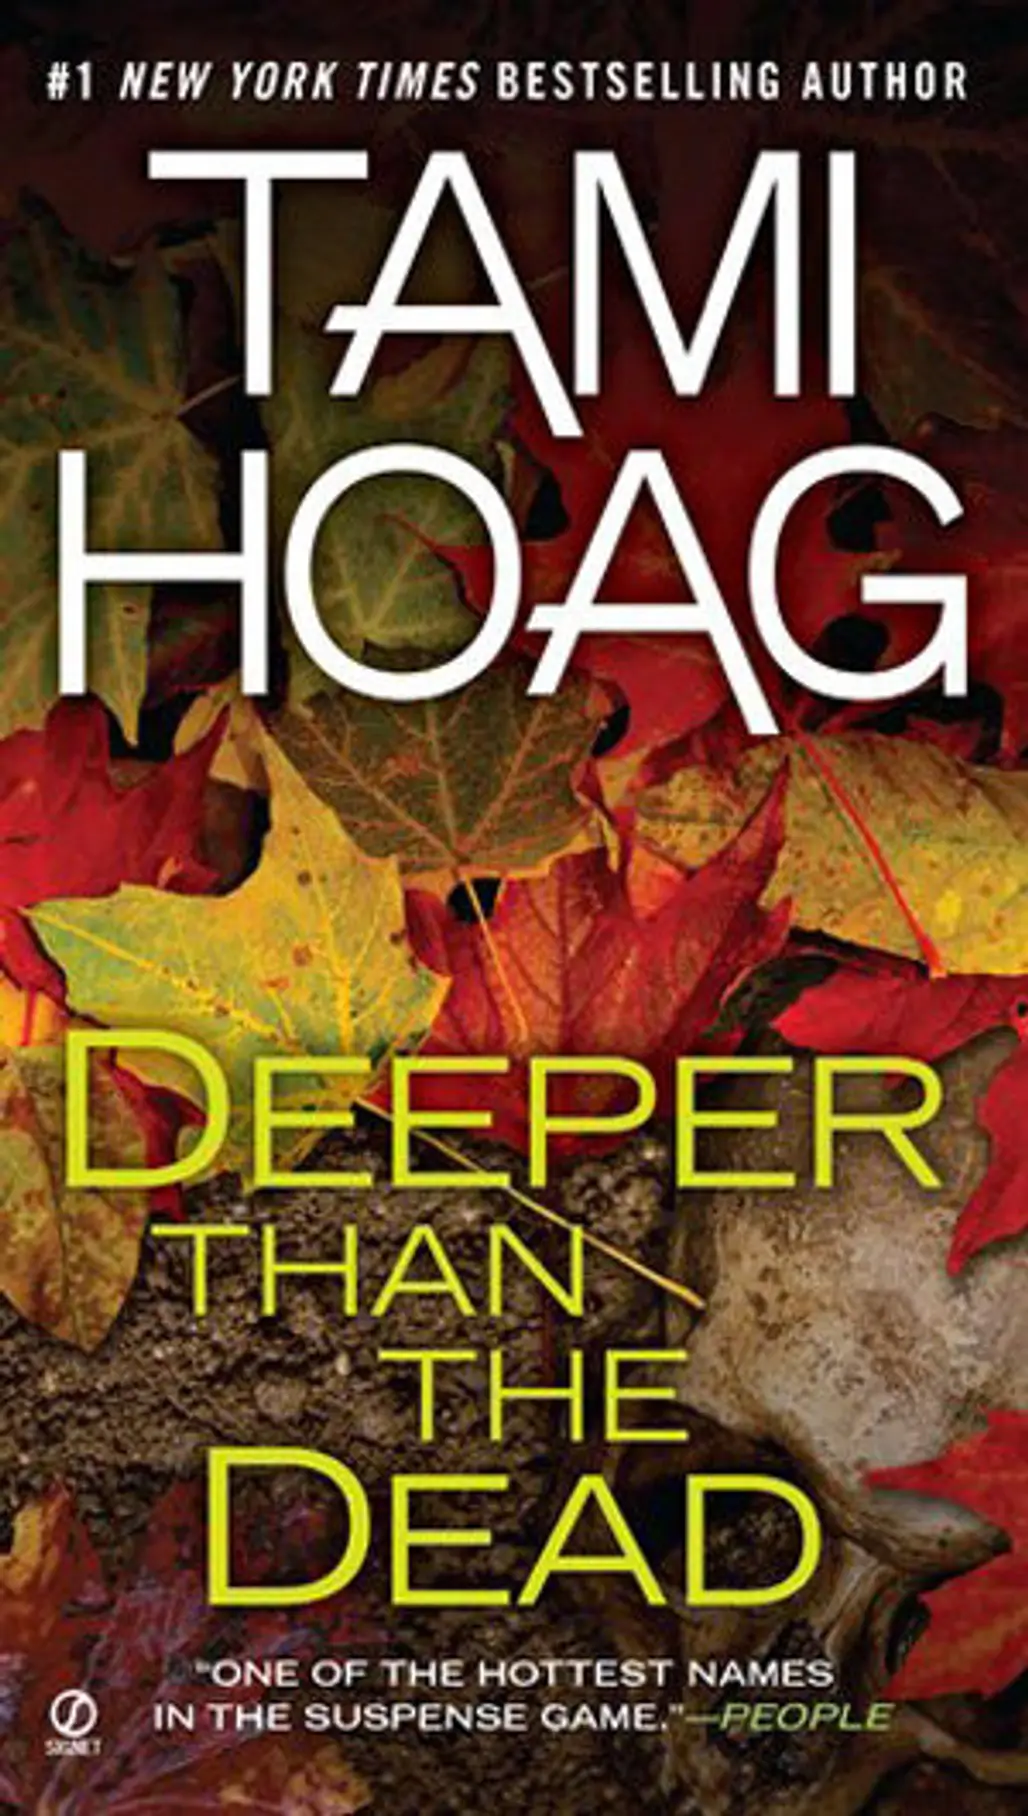 Deeper than the Dead by Tame Hoag